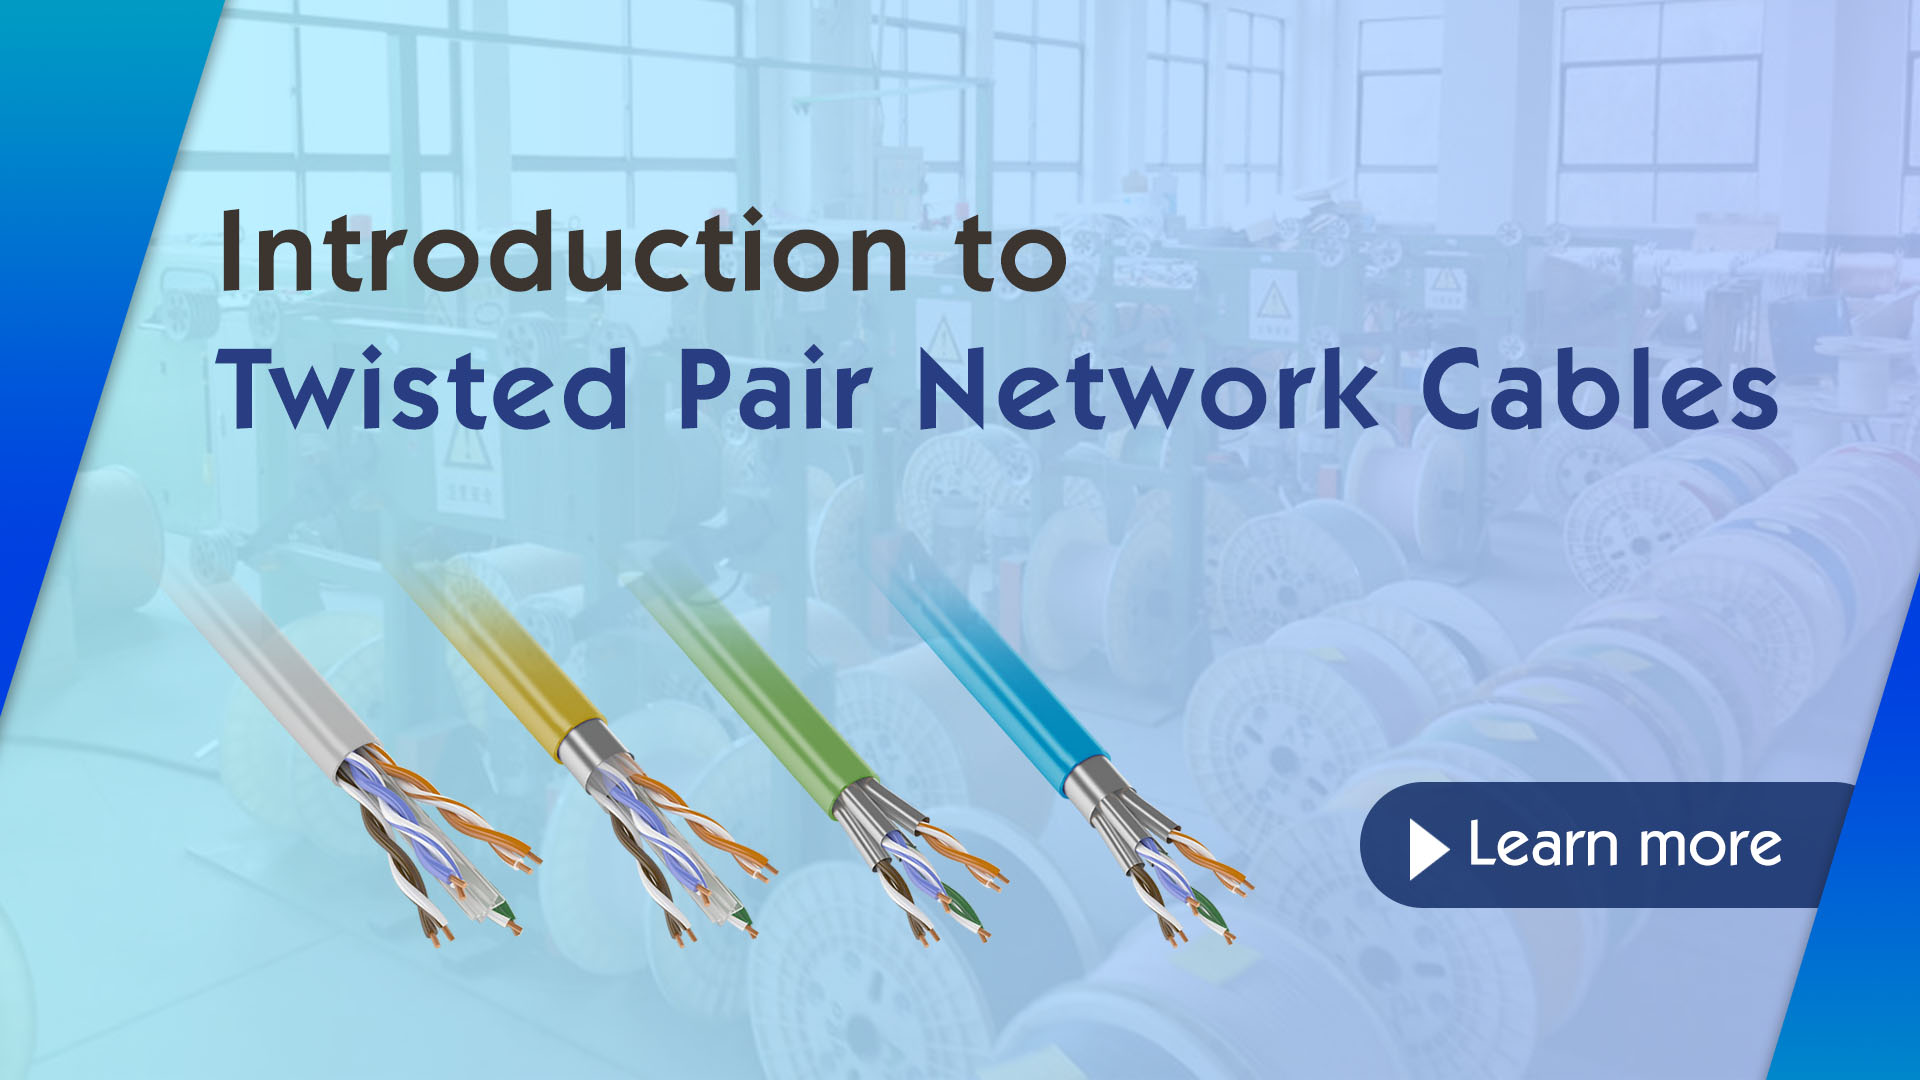 Introduction to twisted pair network cables